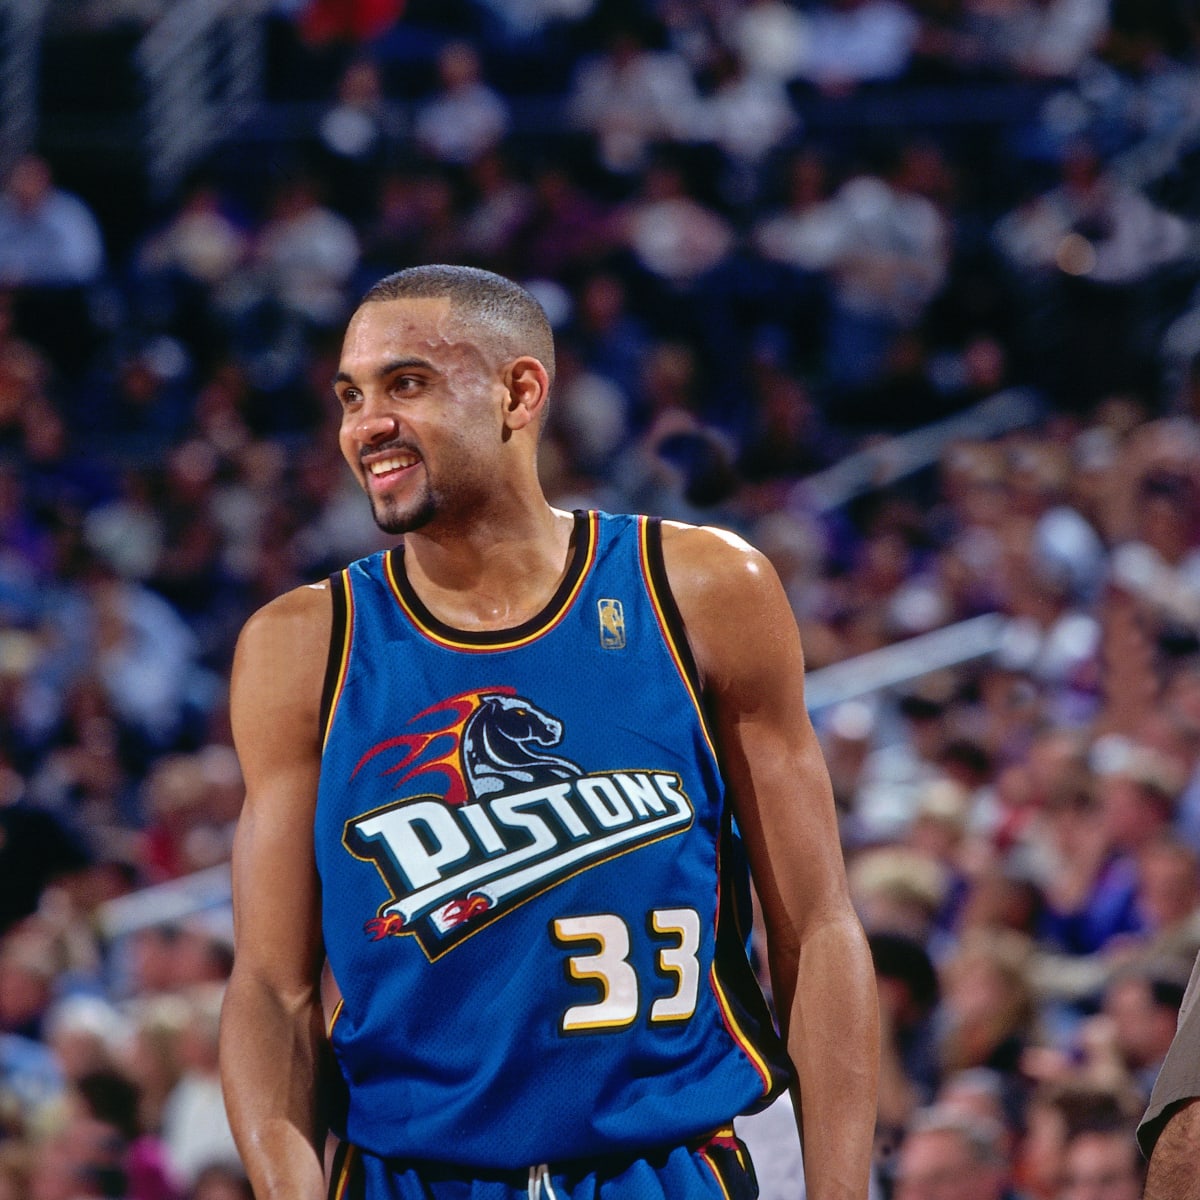 Pistons to Re-introduce Teal Jerseys for 2022-23 NBA Season - In